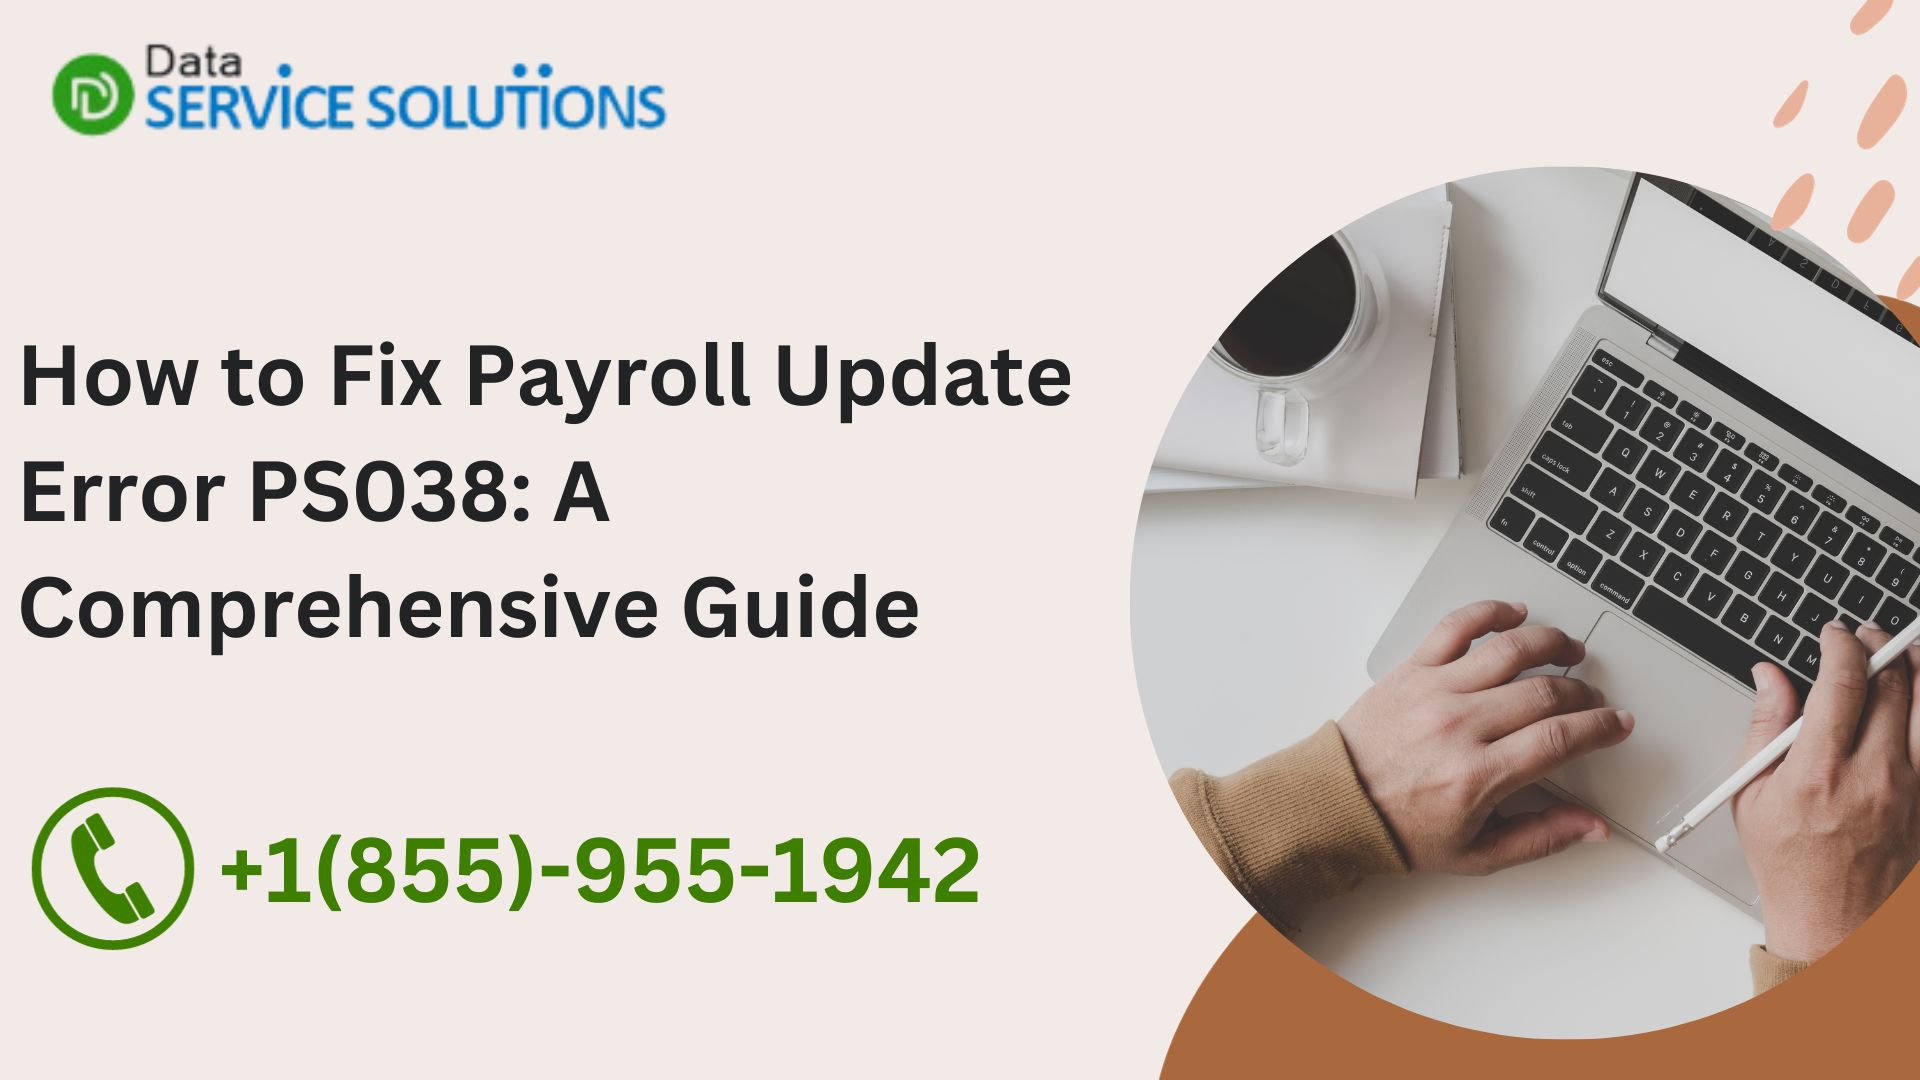 How to Fix Payroll Update Error PS038: A Comprehensive Guide